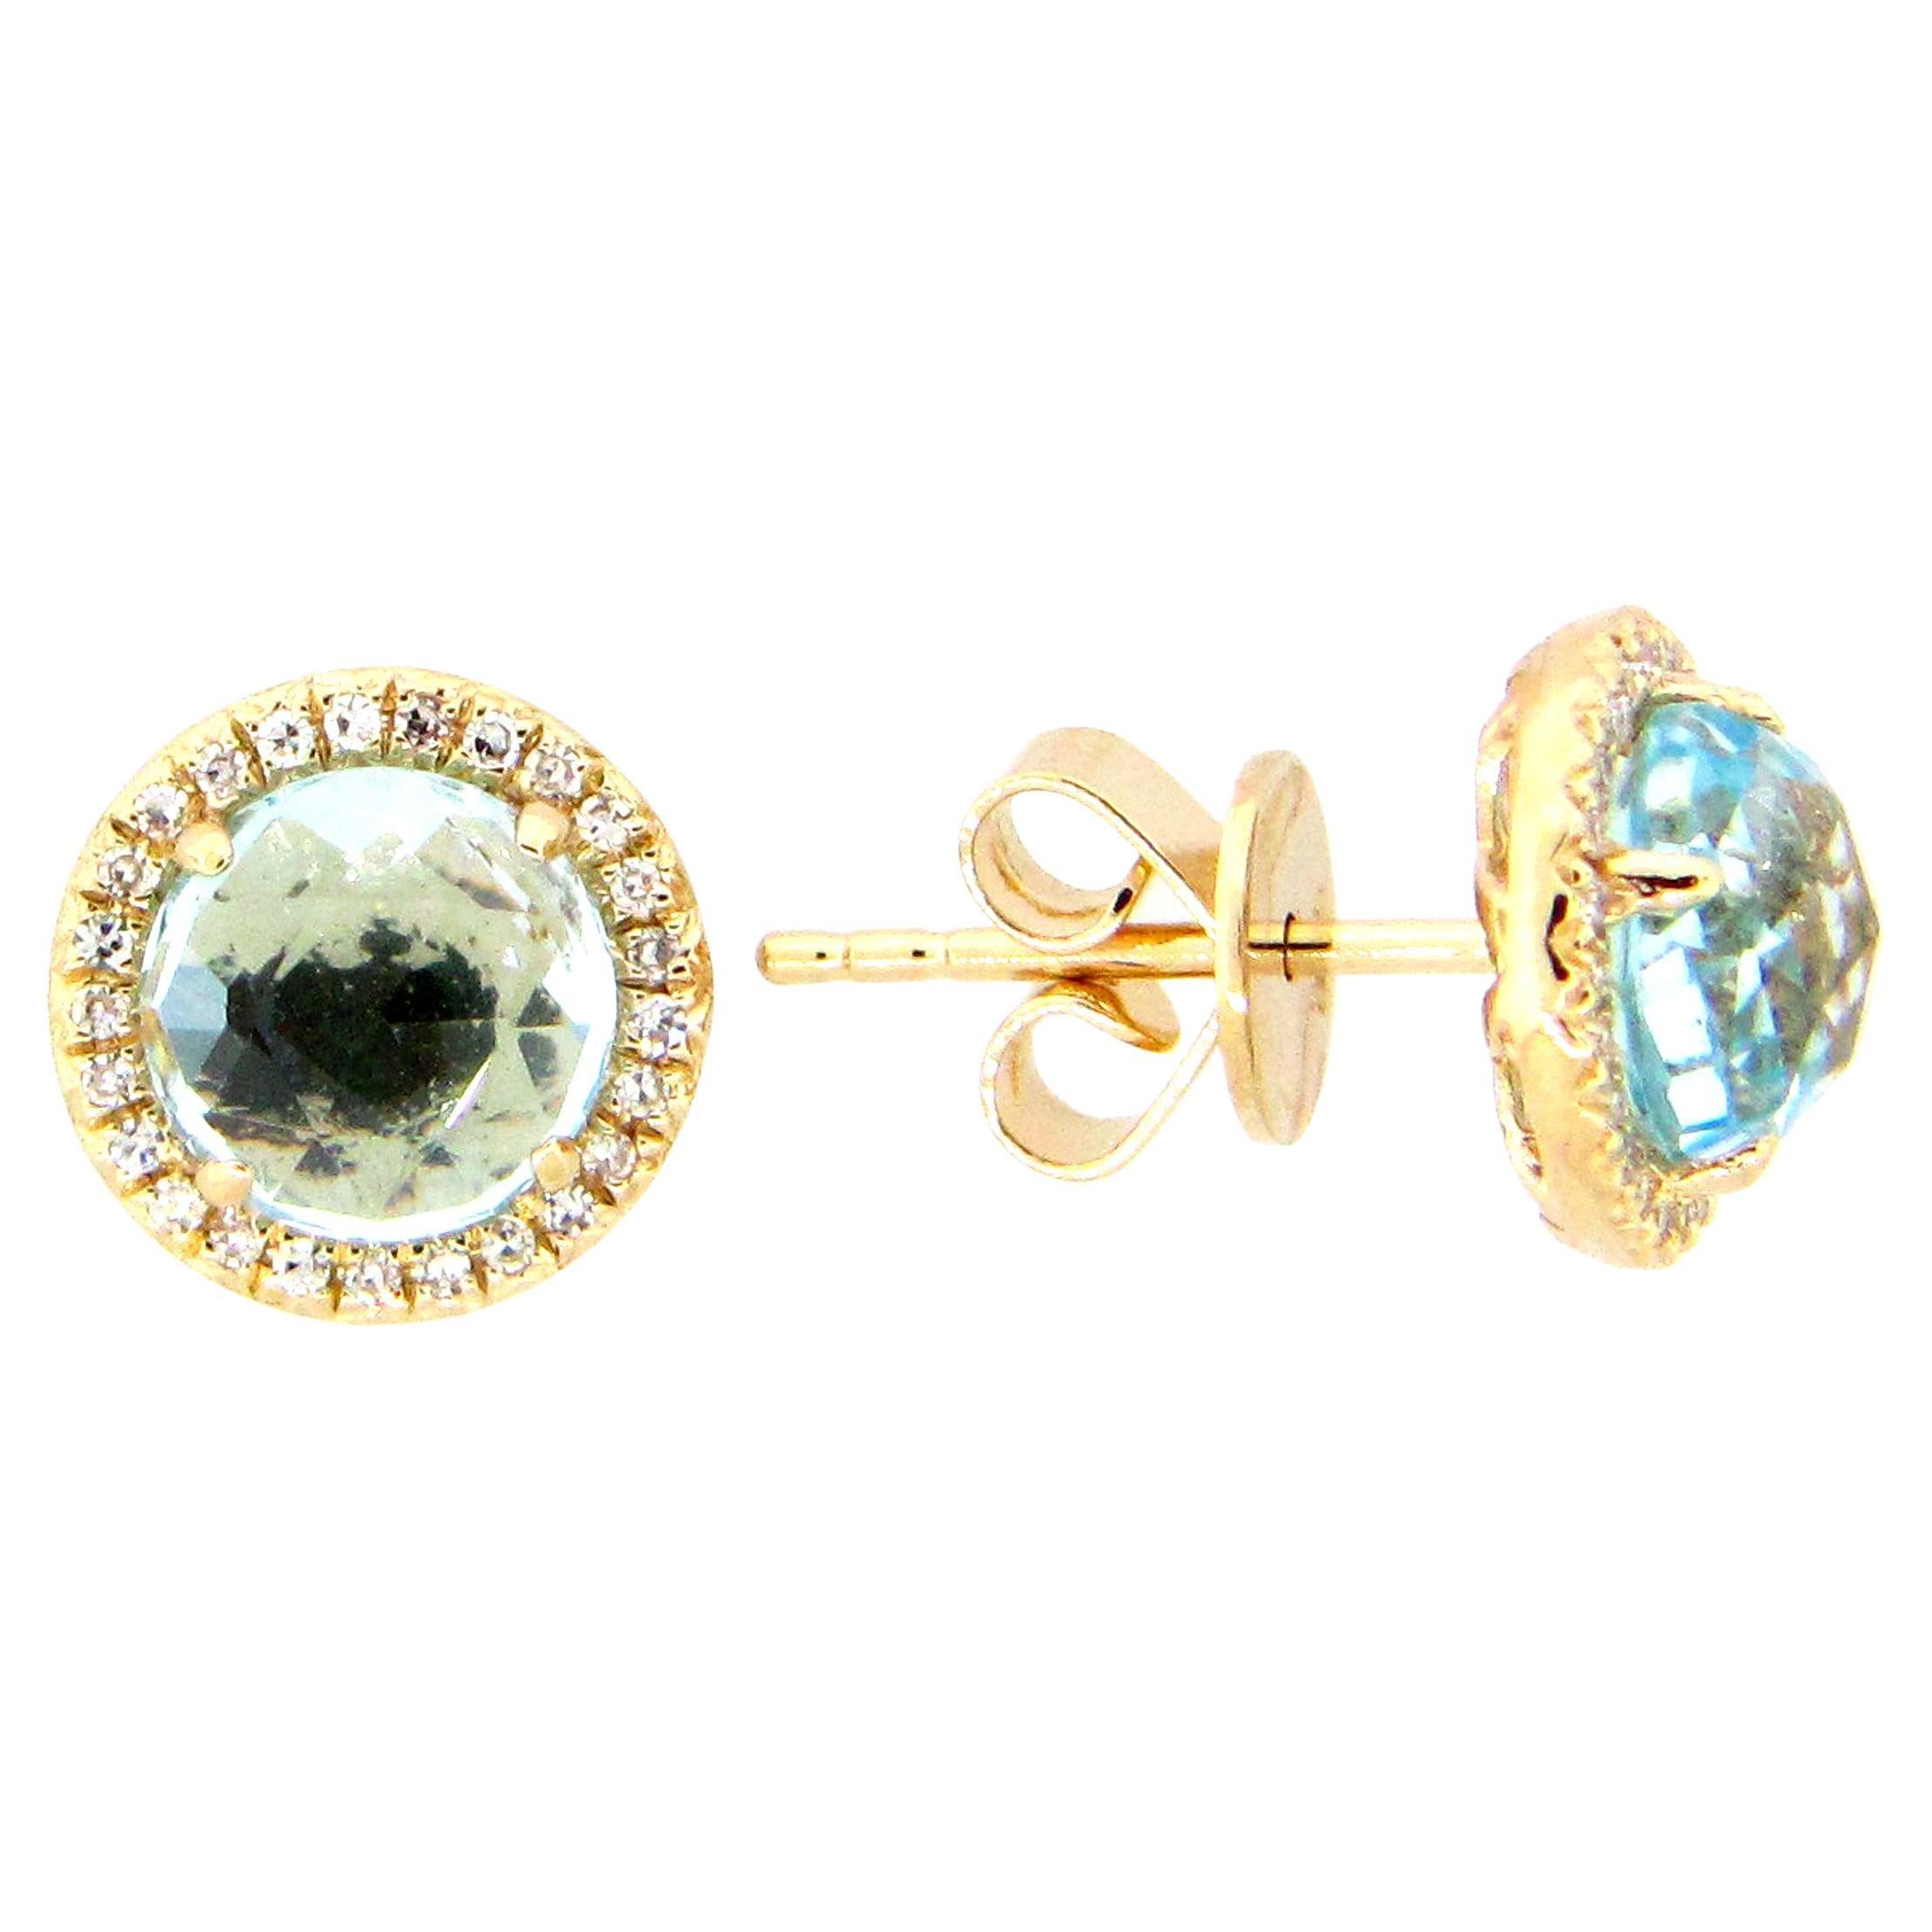 These Blue Topaz & Diamond Earrings are a stunning and timeless accessory that can add a touch of glamour and sophistication to any outfit. 

These earrings each feature a 1.20 Carat Round Blue Topaz, with a Diamond Halo comprised of 0.06 Carats of